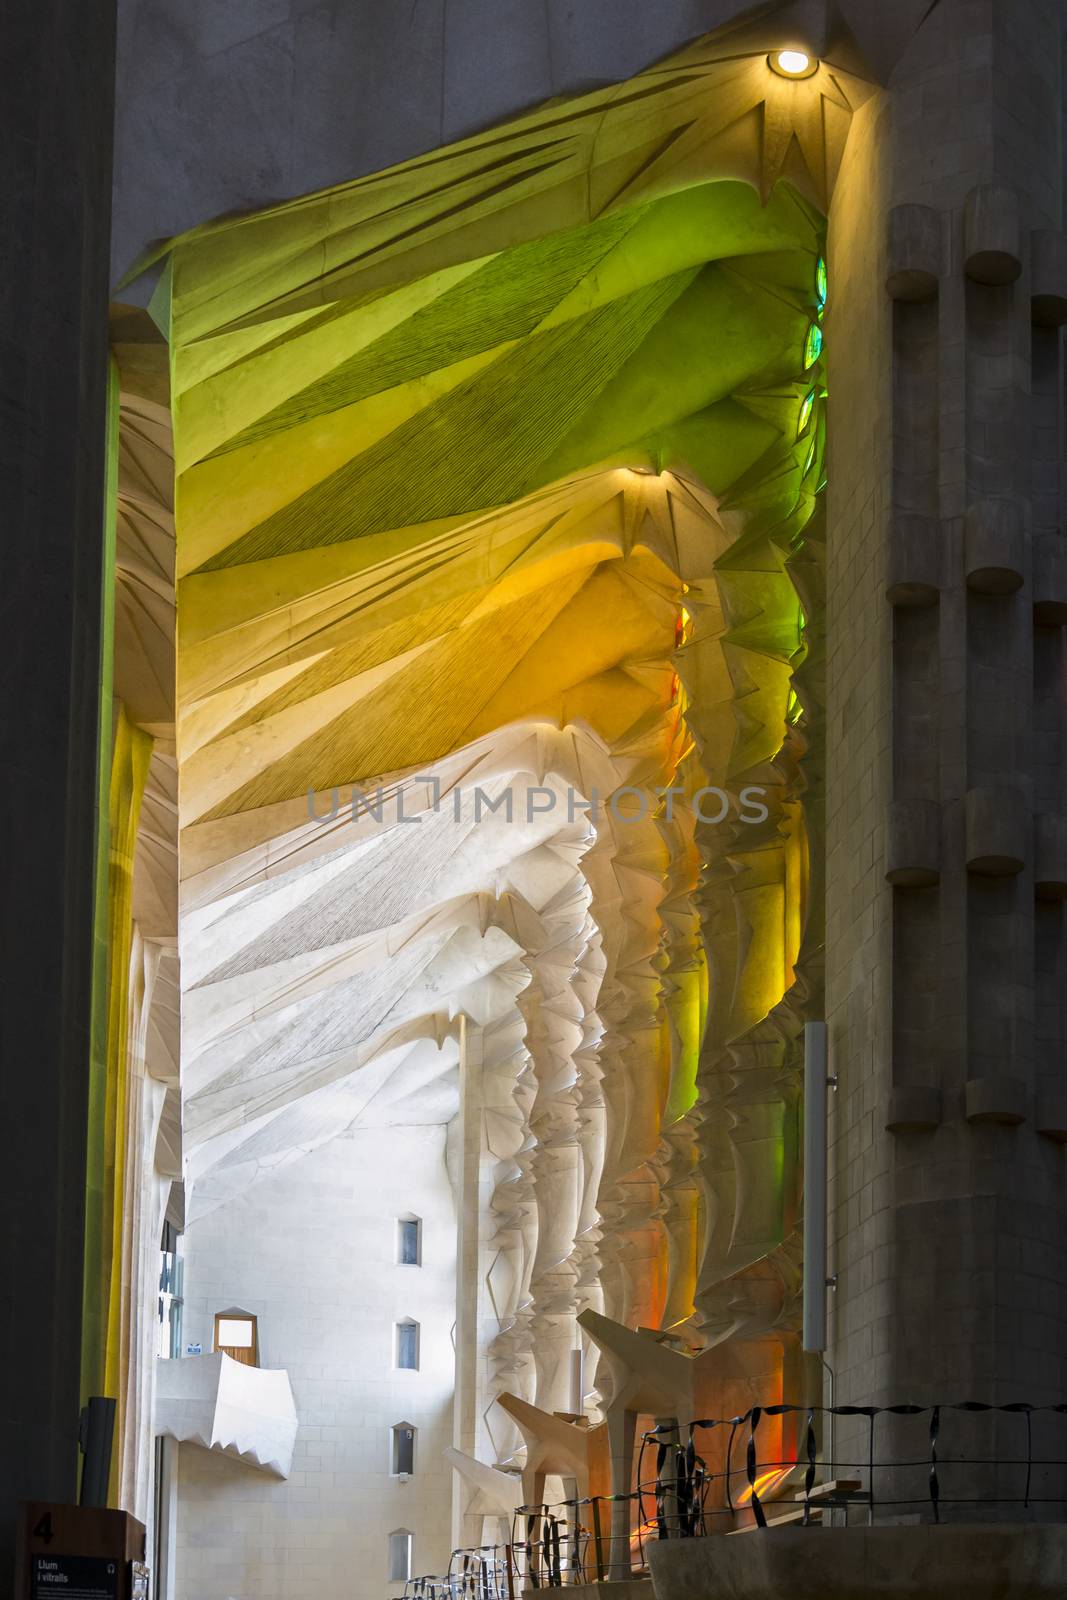 Particular of the colored light inside the Sagrada Familia in Barcelona